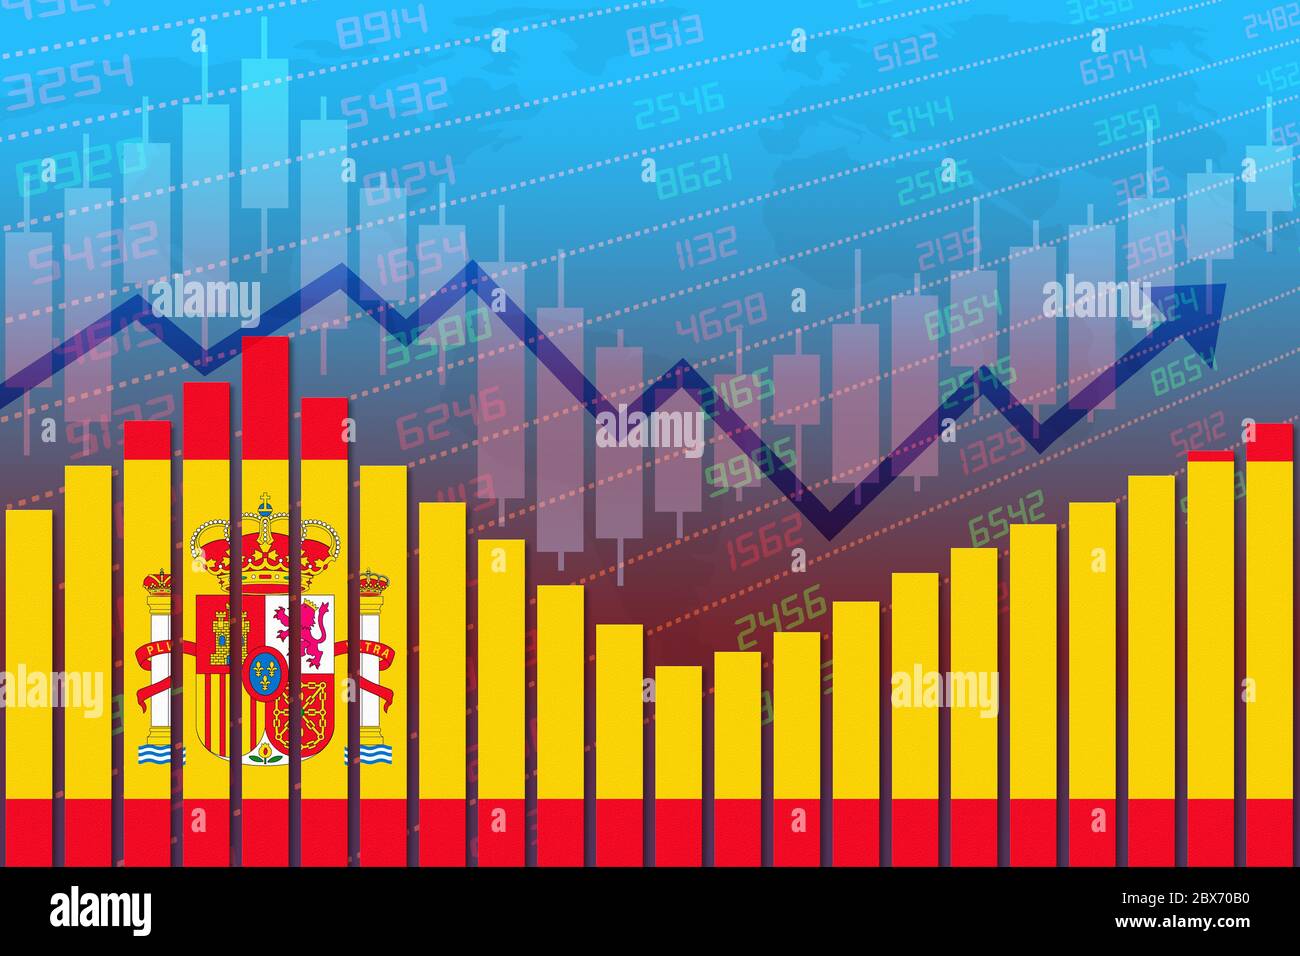 Flag of Spain on bar chart concept of economic recovery and business improving after crisis such as Covid-19 or other catastrophe as economy and busin Stock Photo